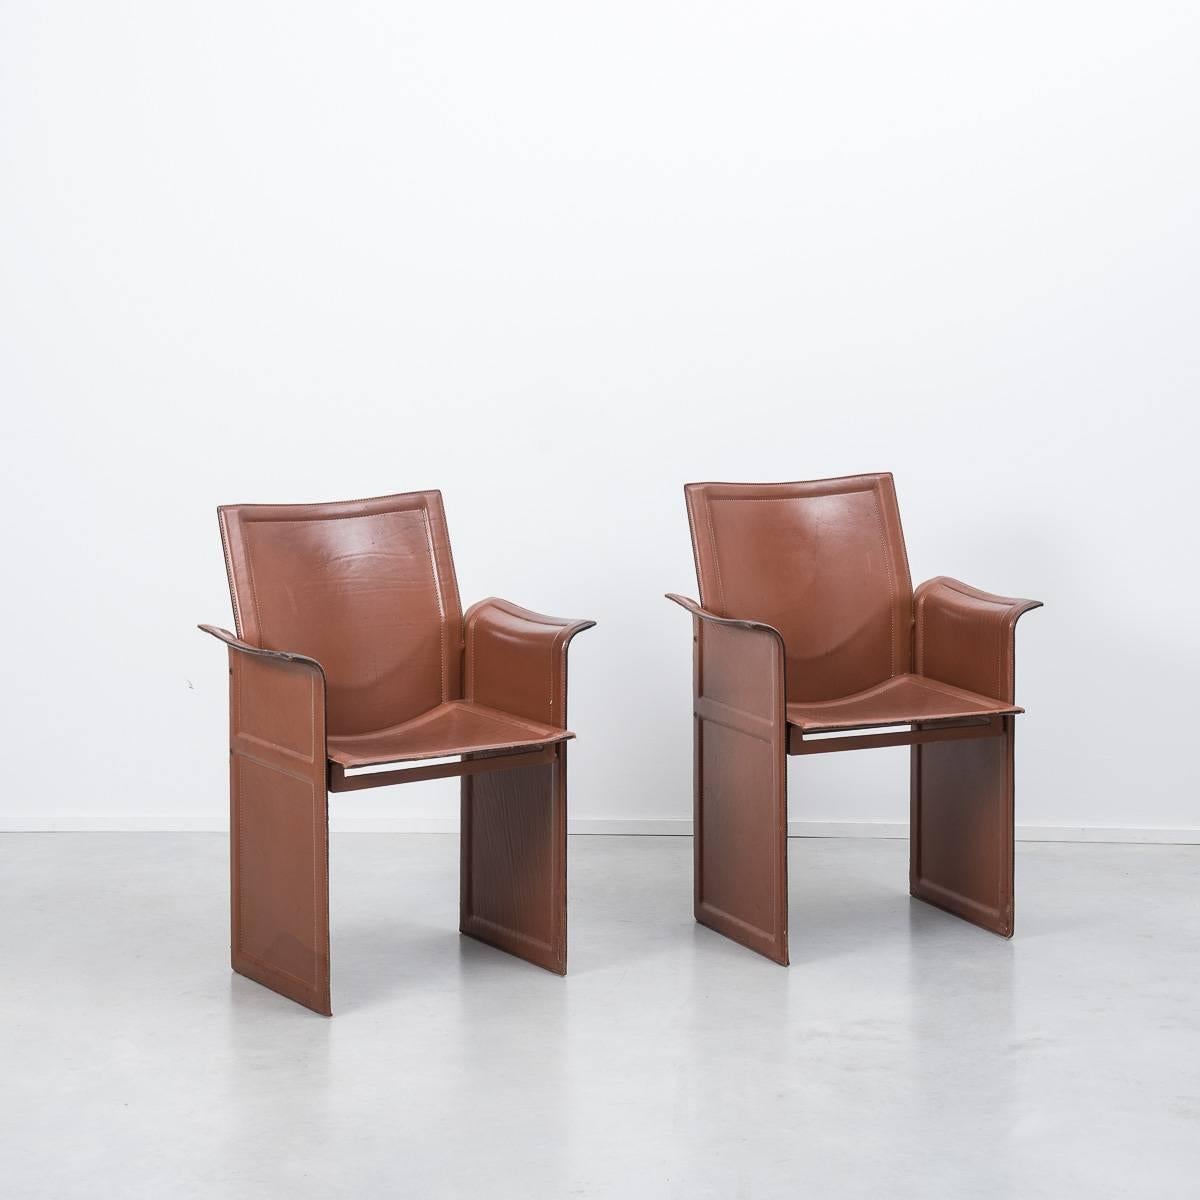 A pair of leather Korium chairs from Italian designer, Tito Agnoli for Matteo Grassi in the late 1970s, in rich rust / burgundy colour.

The chairs feature stitched and moulded leather on metal frame panels. Two are in excellent condition with